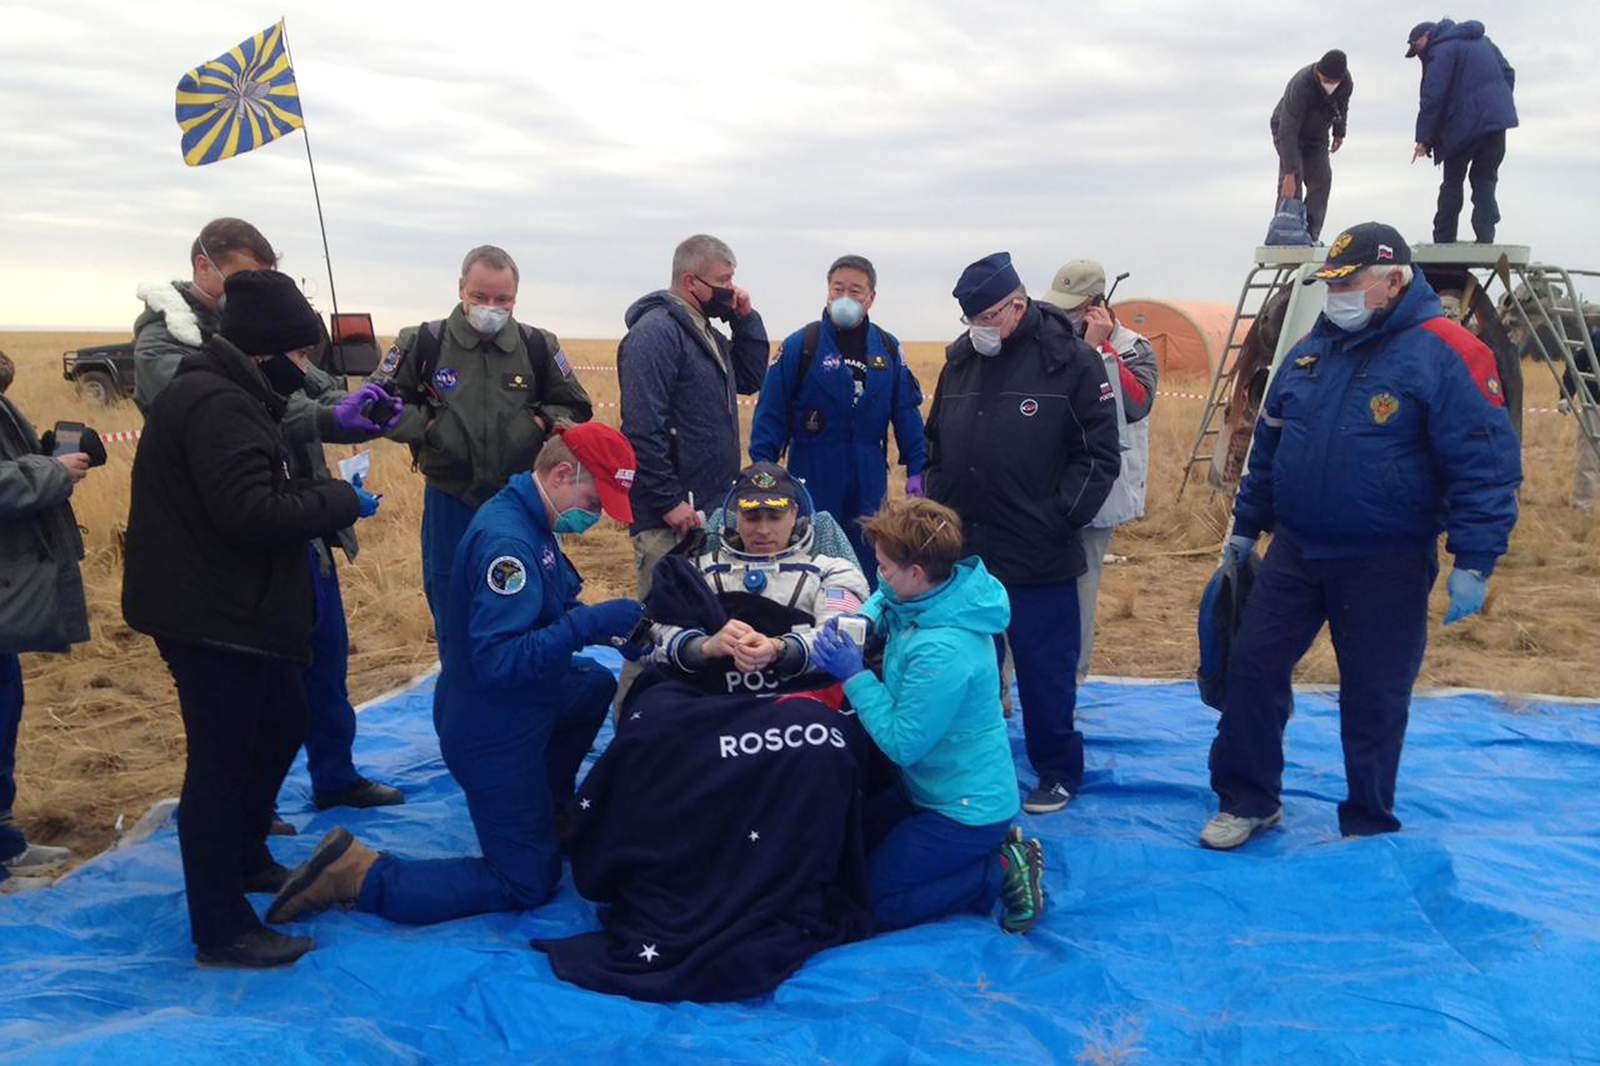 Trio who lived on space station return to Earth safely